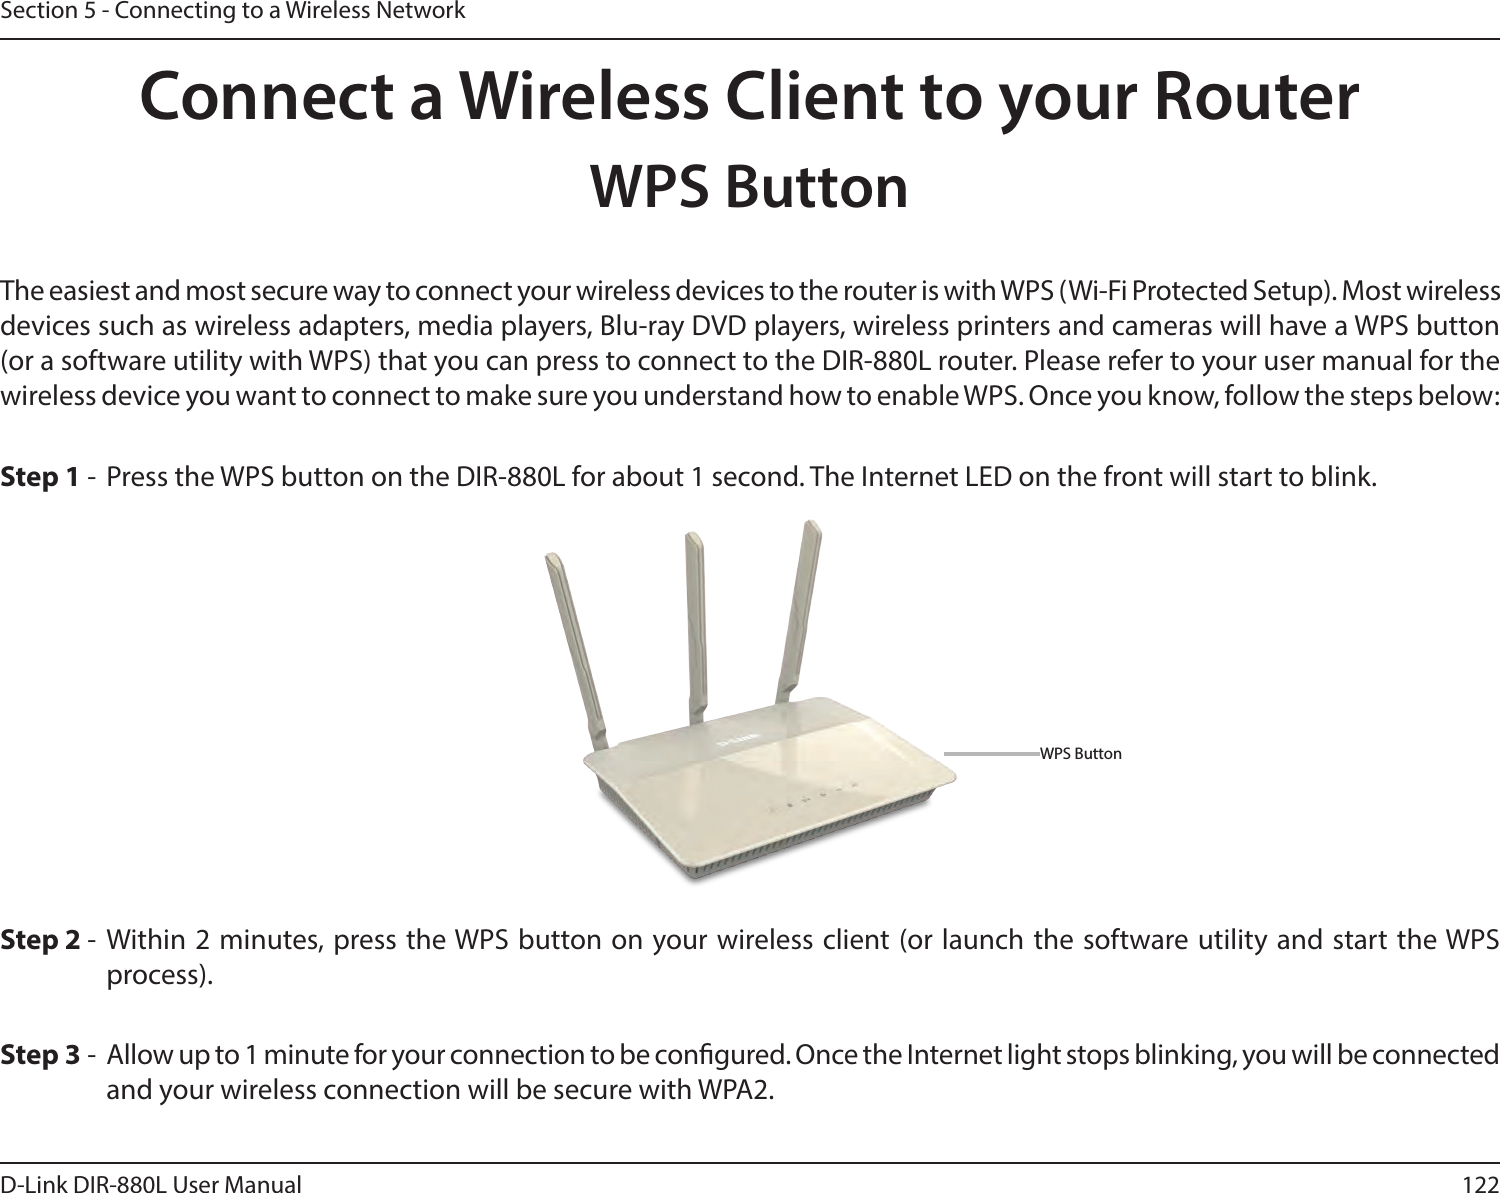 122D-Link DIR-880L User ManualSection 5 - Connecting to a Wireless NetworkConnect a Wireless Client to your RouterWPS ButtonStep 2 - Within 2 minutes, press the WPS button on your wireless client (or launch the software utility and start the WPS process).The easiest and most secure way to connect your wireless devices to the router is with WPS (Wi-Fi Protected Setup). Most wireless devices such as wireless adapters, media players, Blu-ray DVD players, wireless printers and cameras will have a WPS button (or a software utility with WPS) that you can press to connect to the DIR-880L router. Please refer to your user manual for the wireless device you want to connect to make sure you understand how to enable WPS. Once you know, follow the steps below:Step 1 - Press the WPS button on the DIR-880L for about 1 second. The Internet LED on the front will start to blink.Step 3 - Allow up to 1 minute for your connection to be congured. Once the Internet light stops blinking, you will be connected and your wireless connection will be secure with WPA2.WPS Button